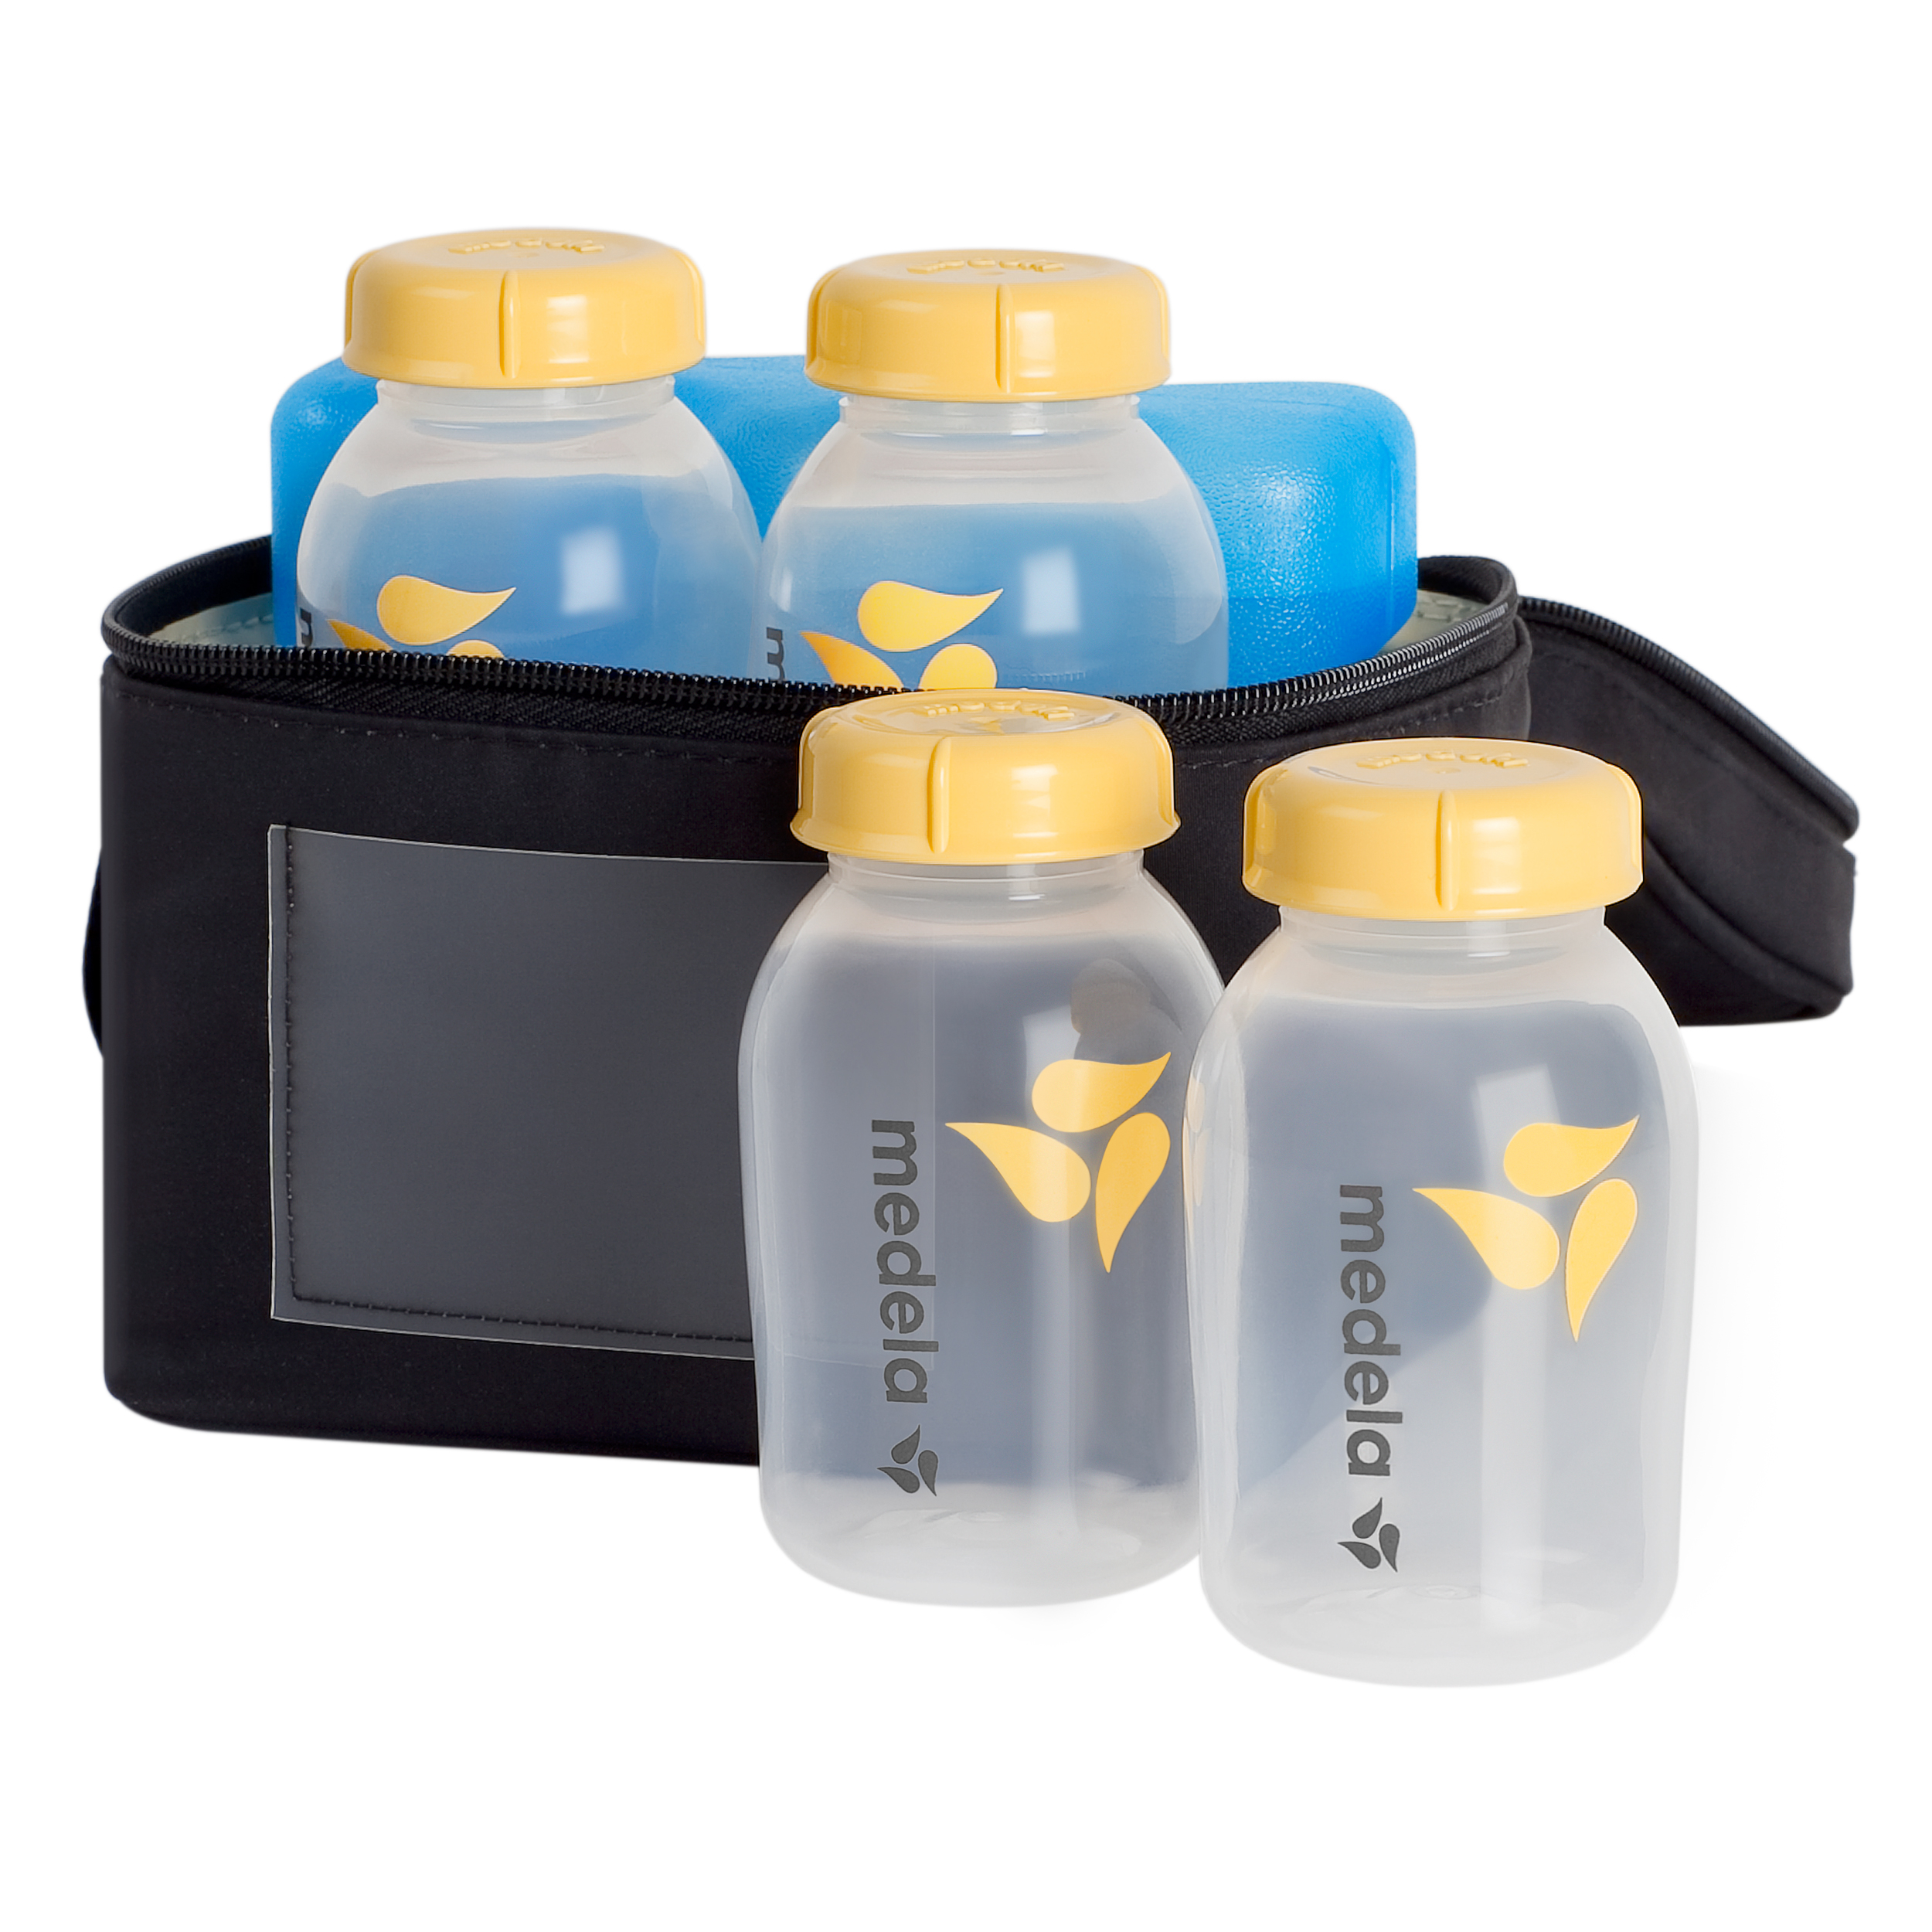 Medela Pump In Style Advanced Breast Pump with On-the-go Tote with International Adapter - image 2 of 9